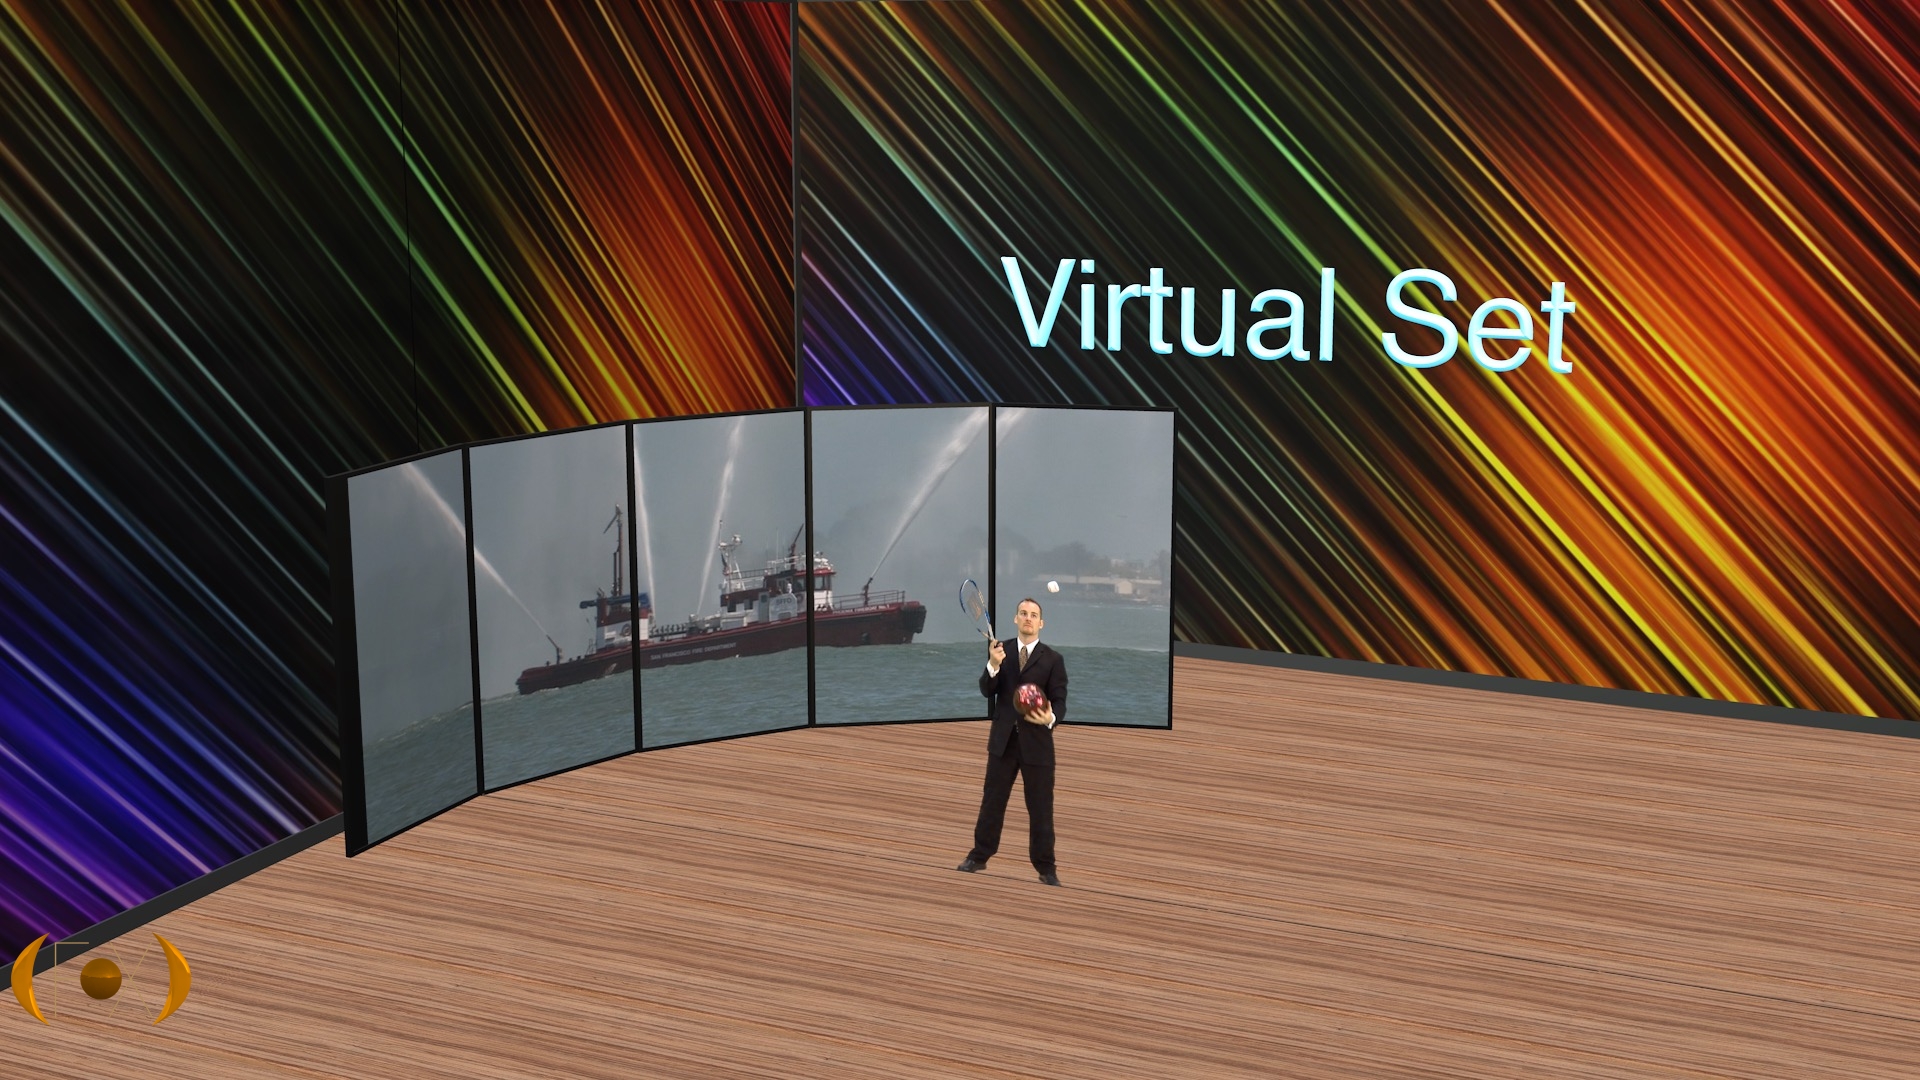 Virtual Set - 3D model with green screen actor